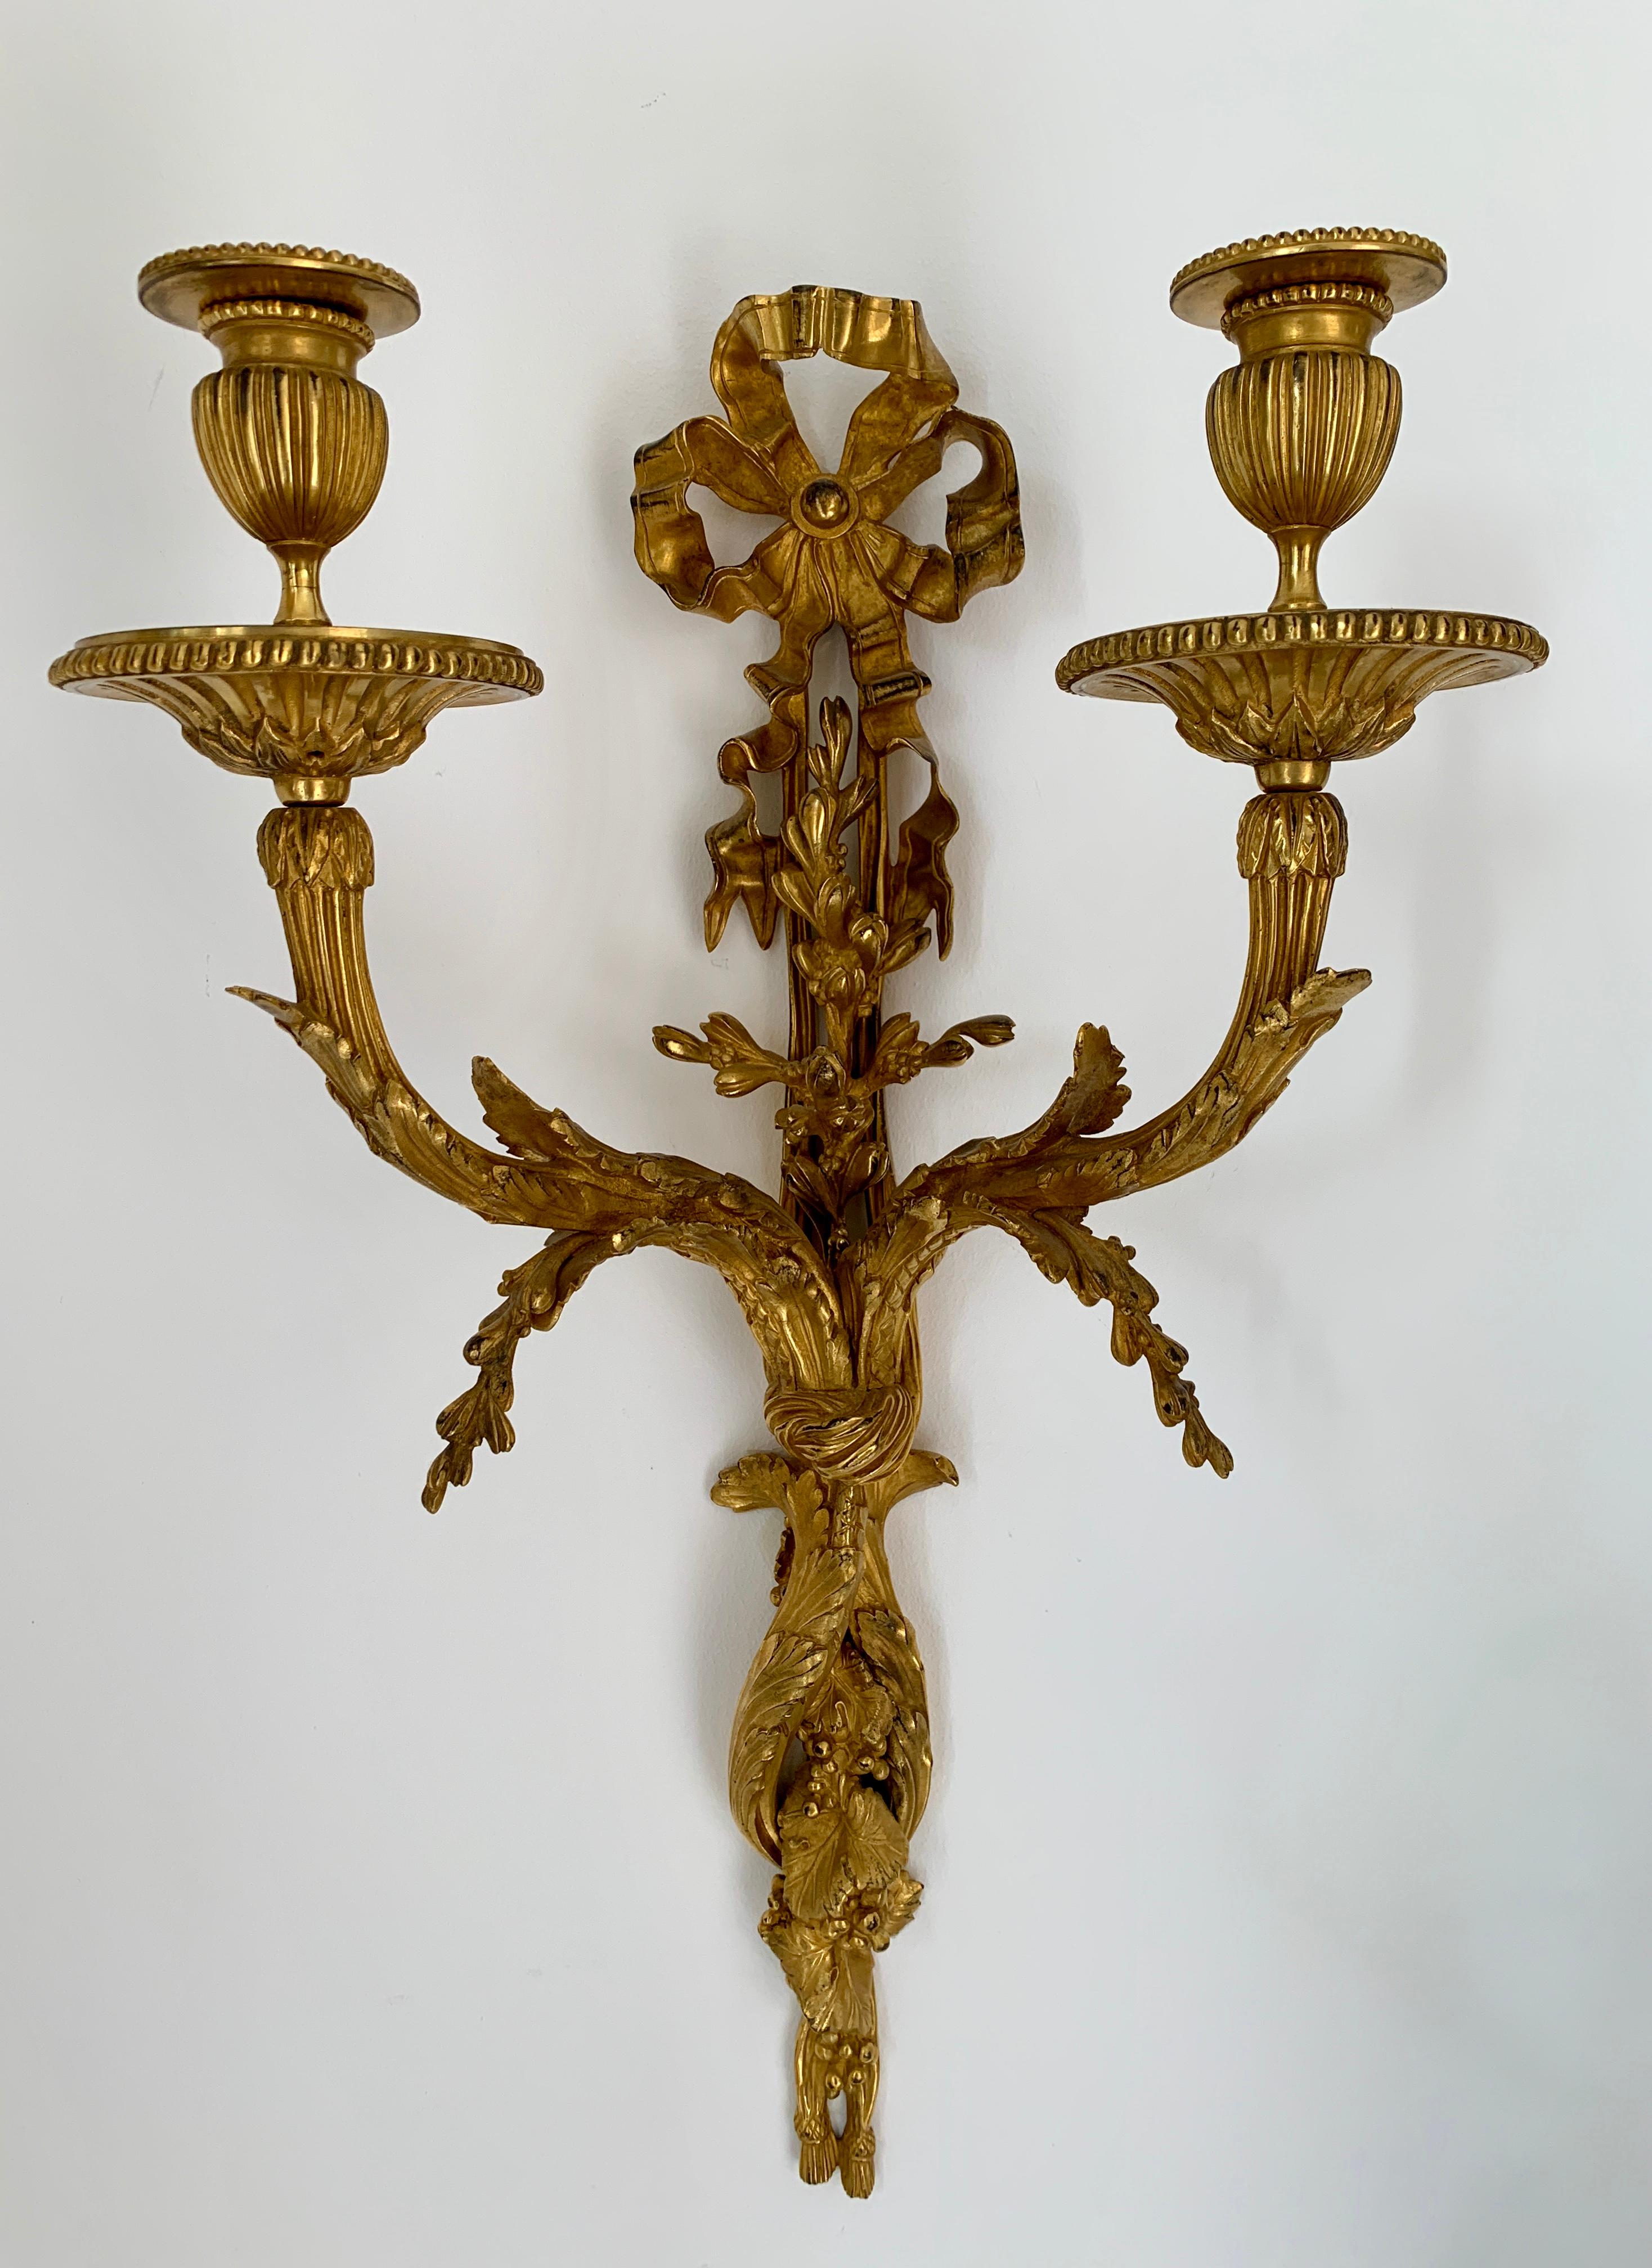 A very high quality and rare pair of French 19th century Louis XVI style gilt-bronze twin-branch wall appliques. The superb sconces display sensationally chased grapes and vines below two S scrolled reeded arms. Each arm is seamlessly tied together